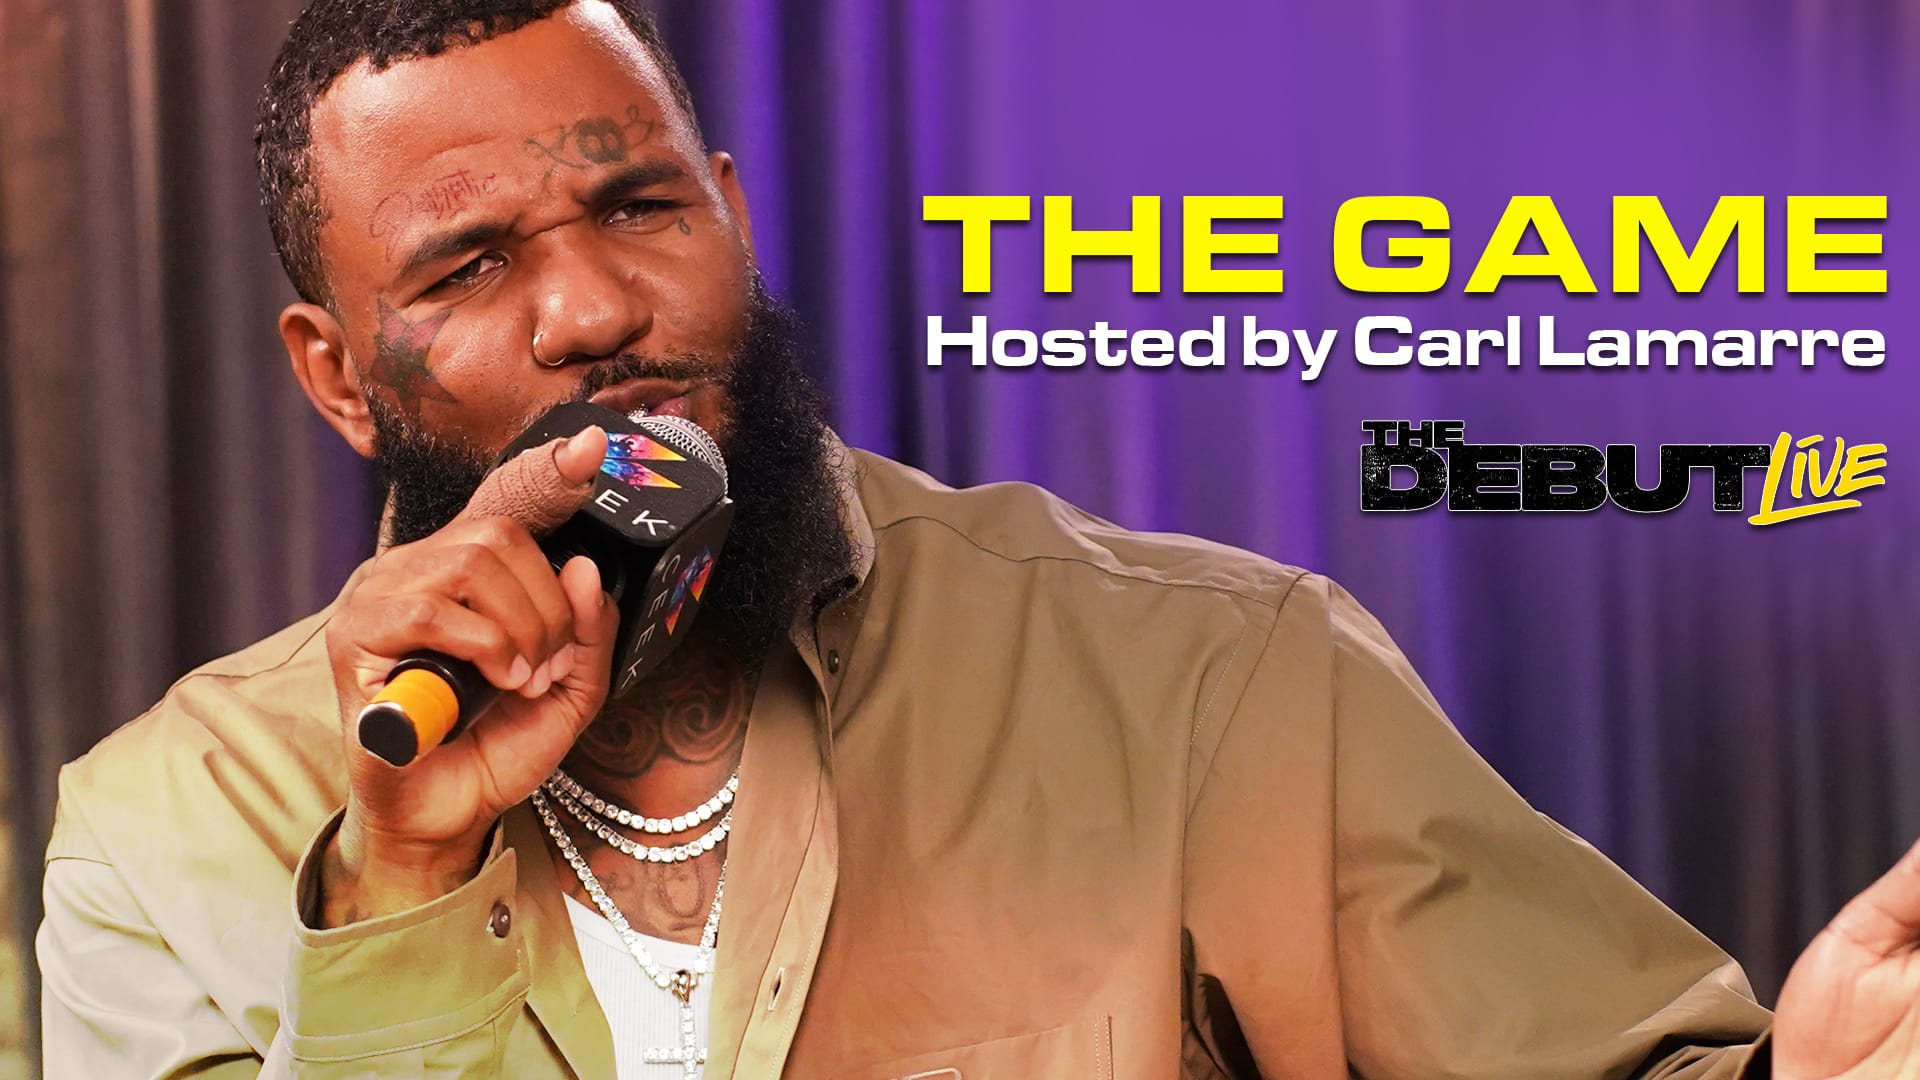 Debut Live EP1 ft. The Game ceek.com